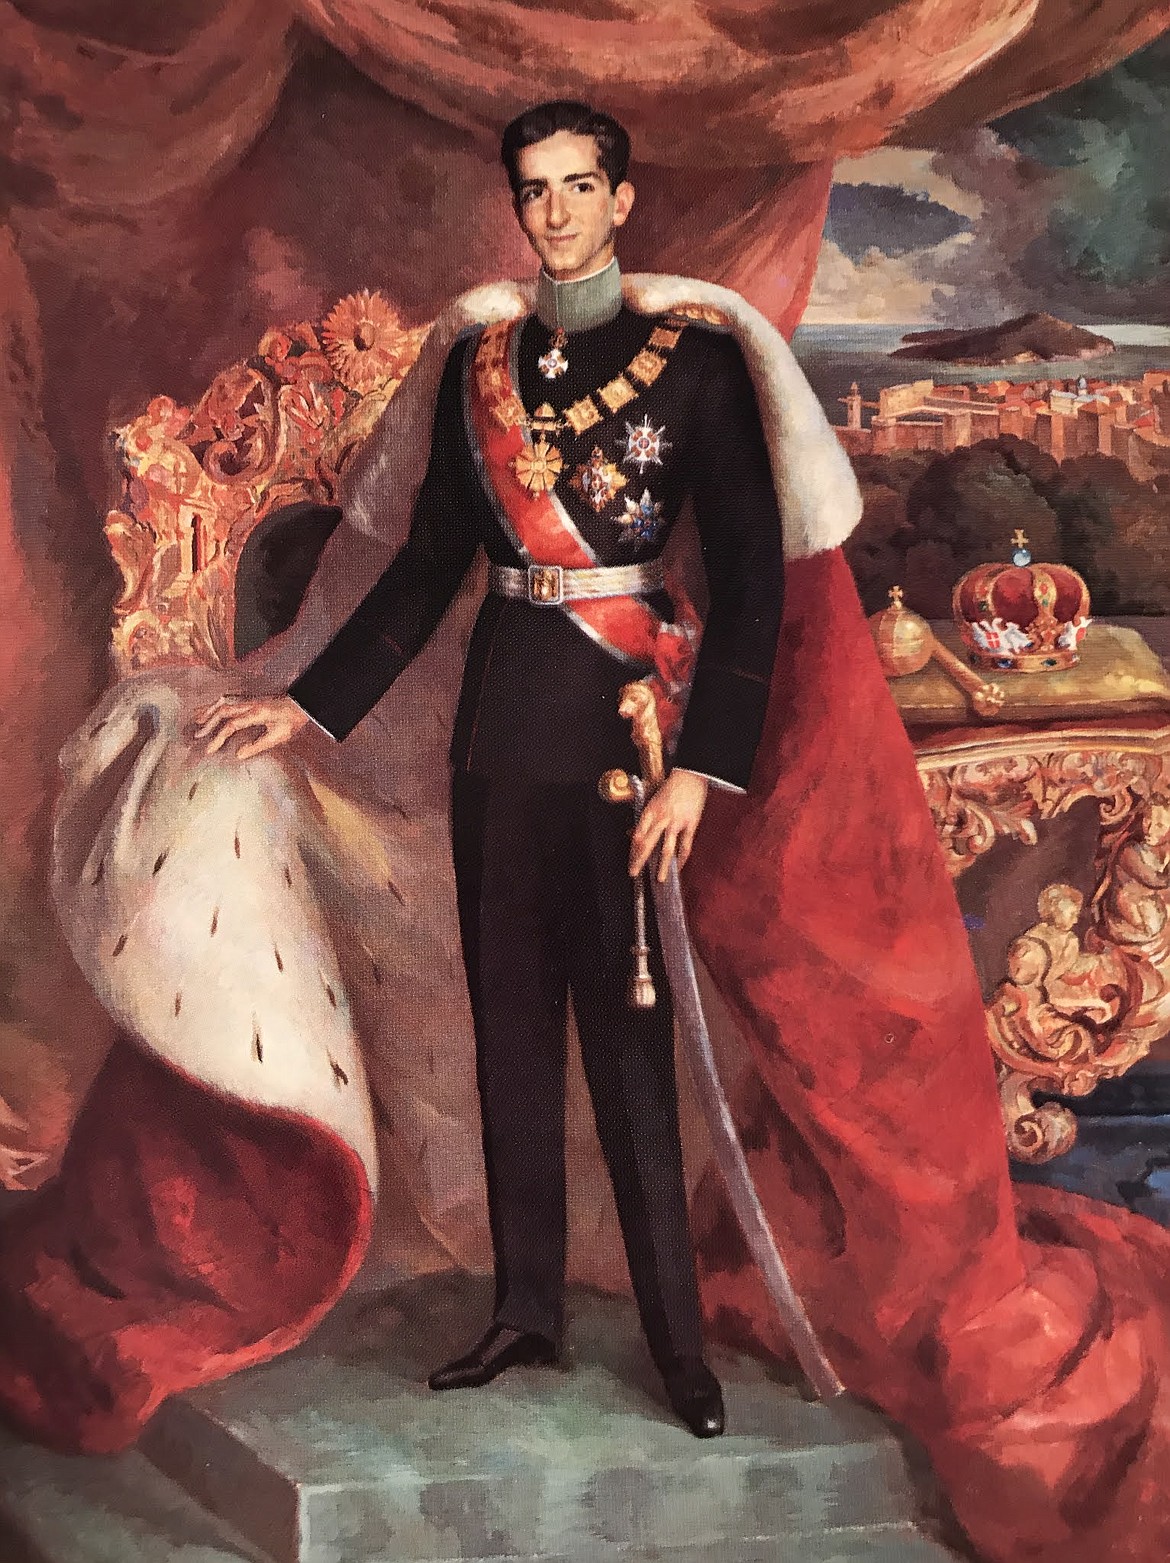 After the end of World War II, exiled King Peter II of Yugoslavia was deposed when the wartime communist Partisan guerrilla leader Josef Broz Tito became the nation’s prime minister.